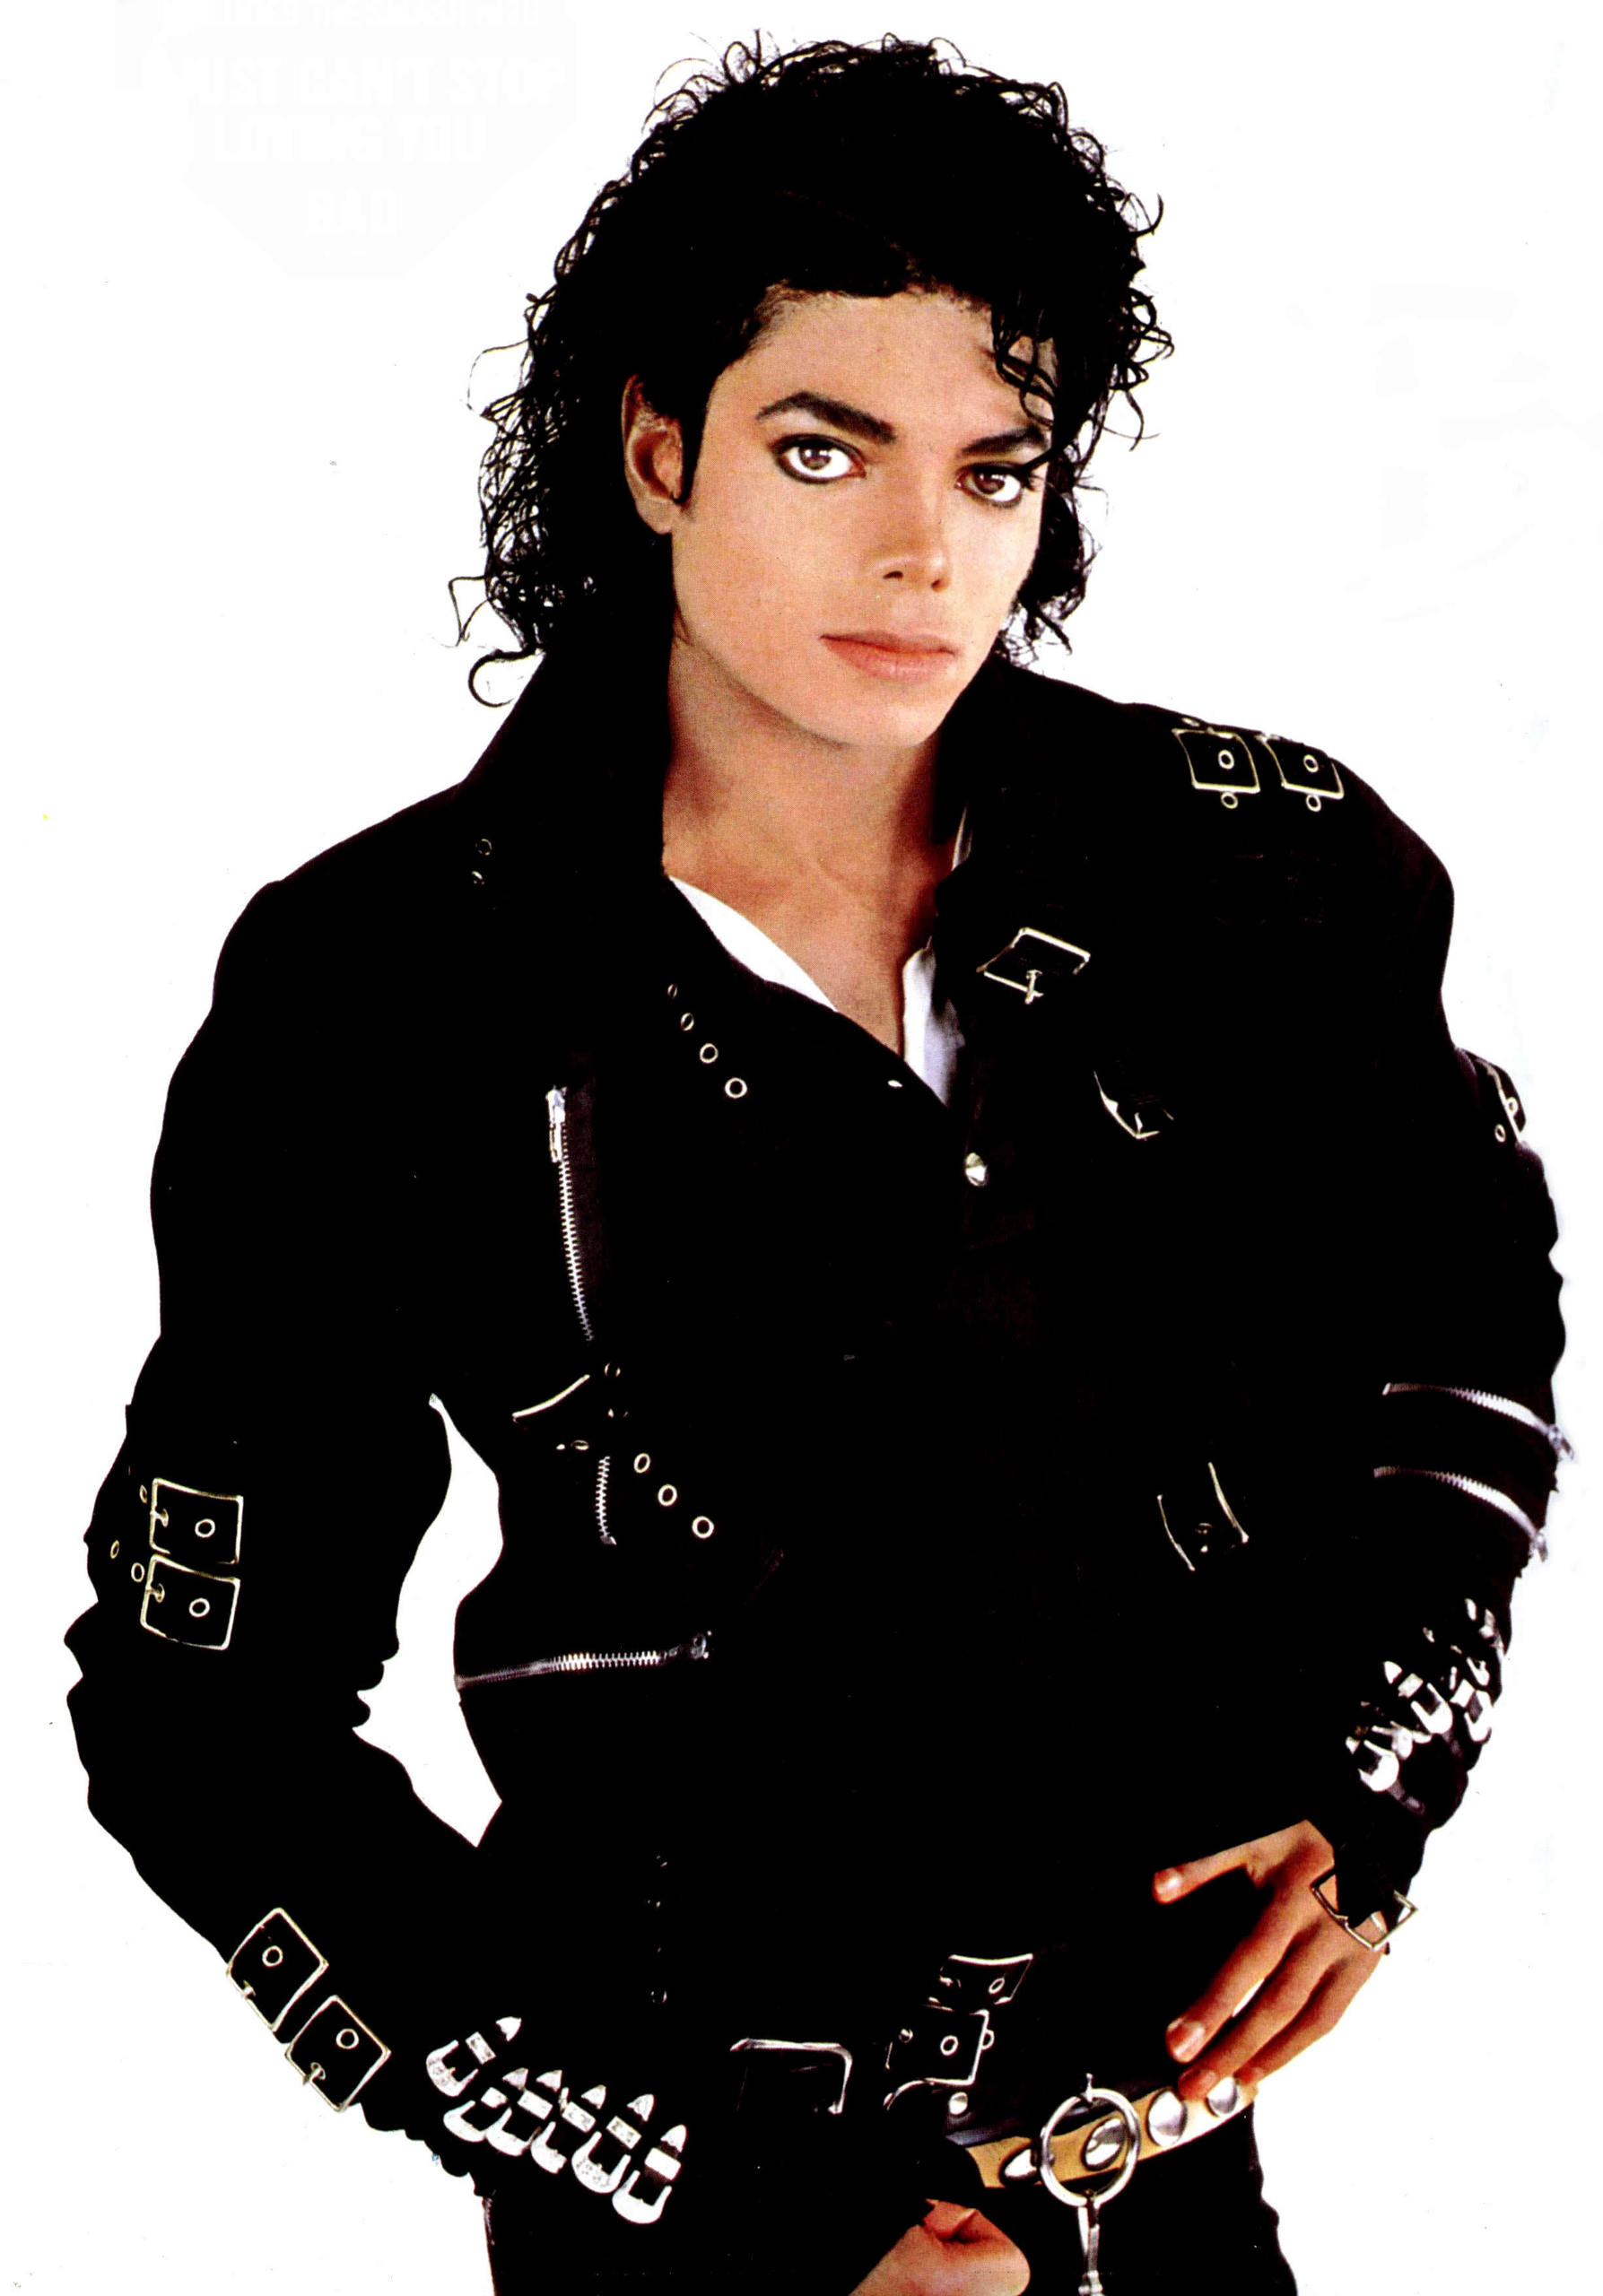 Michael Jackson Image Bad Hq HD Wallpaper And Background Photos